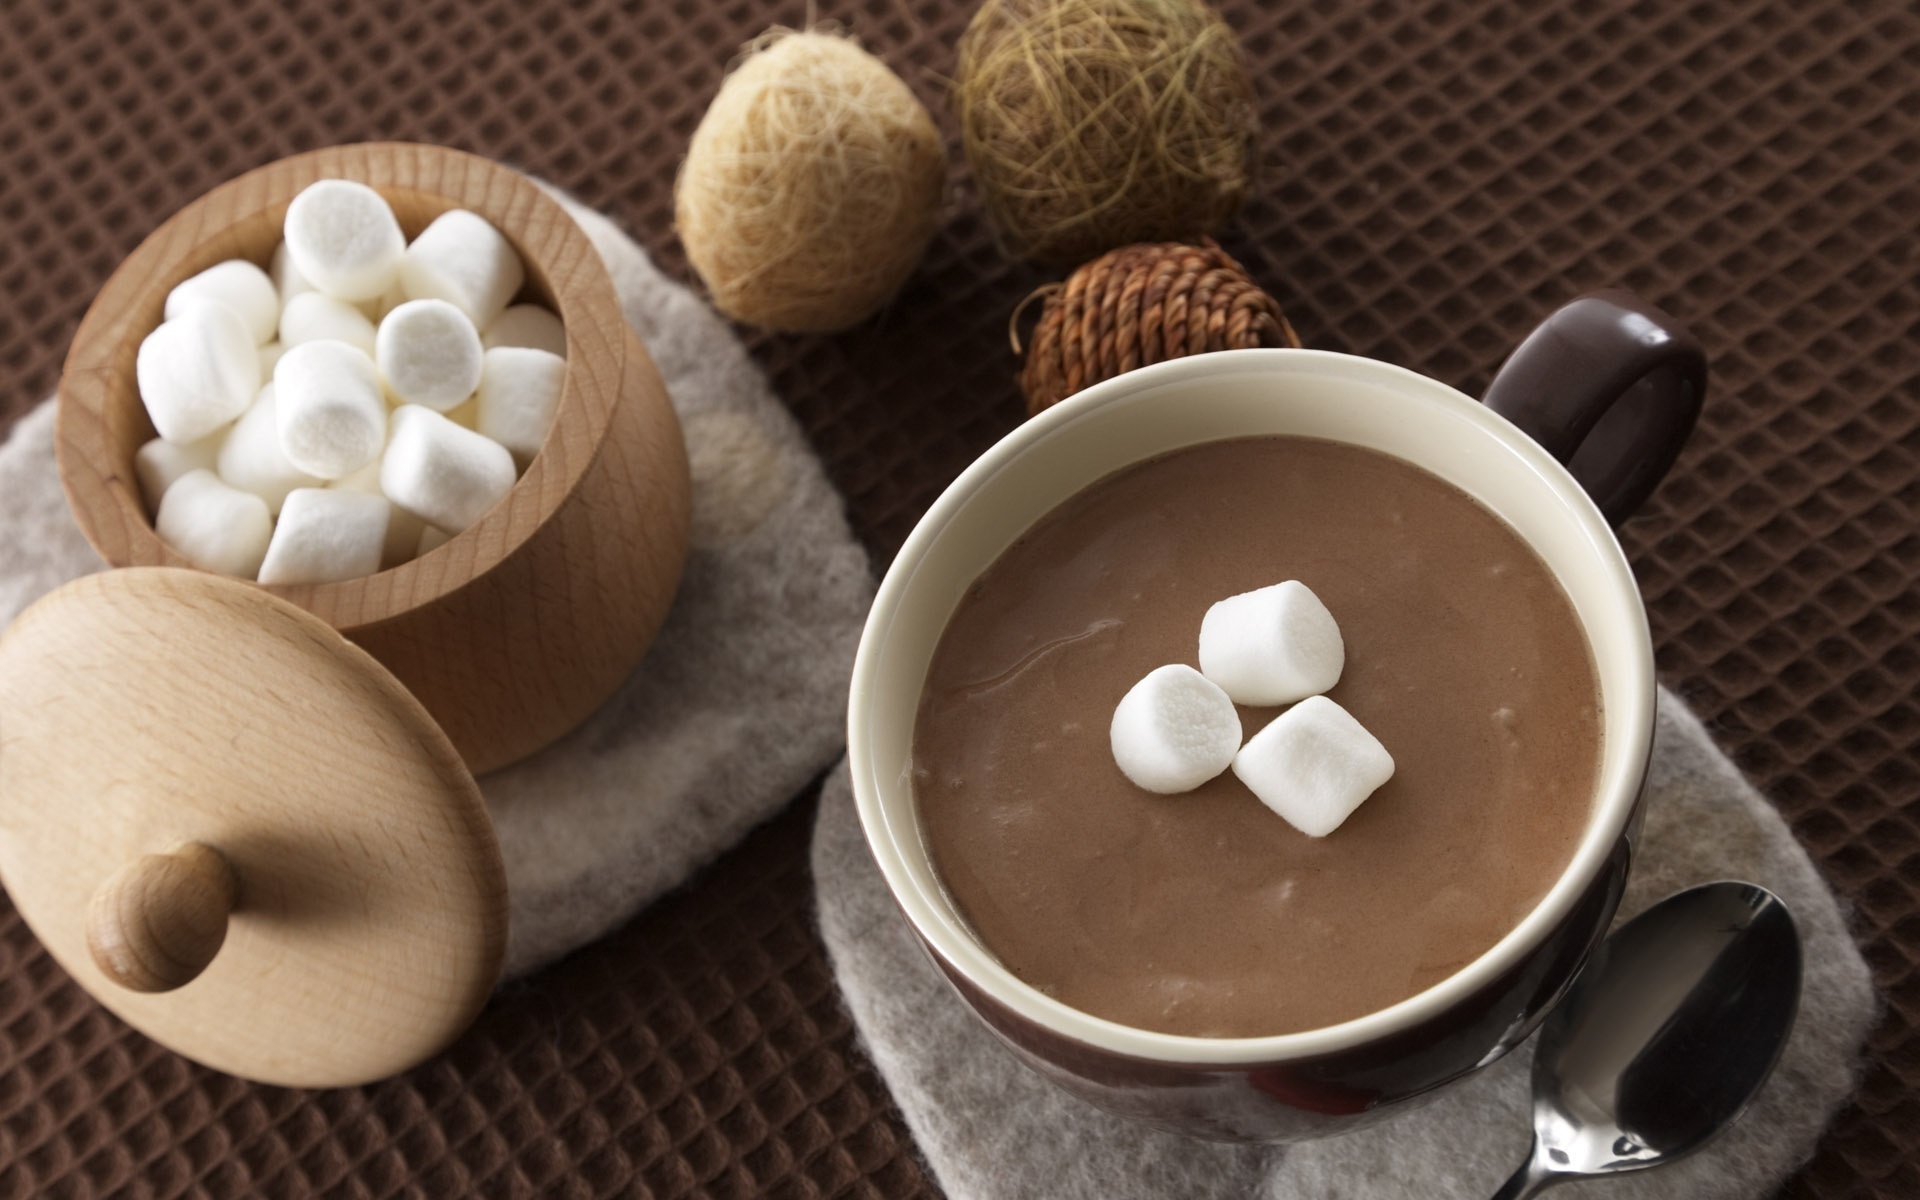 Hot Chocolate Wallpaper Hd - Hot Chocolate With Marshmallows - HD Wallpaper 